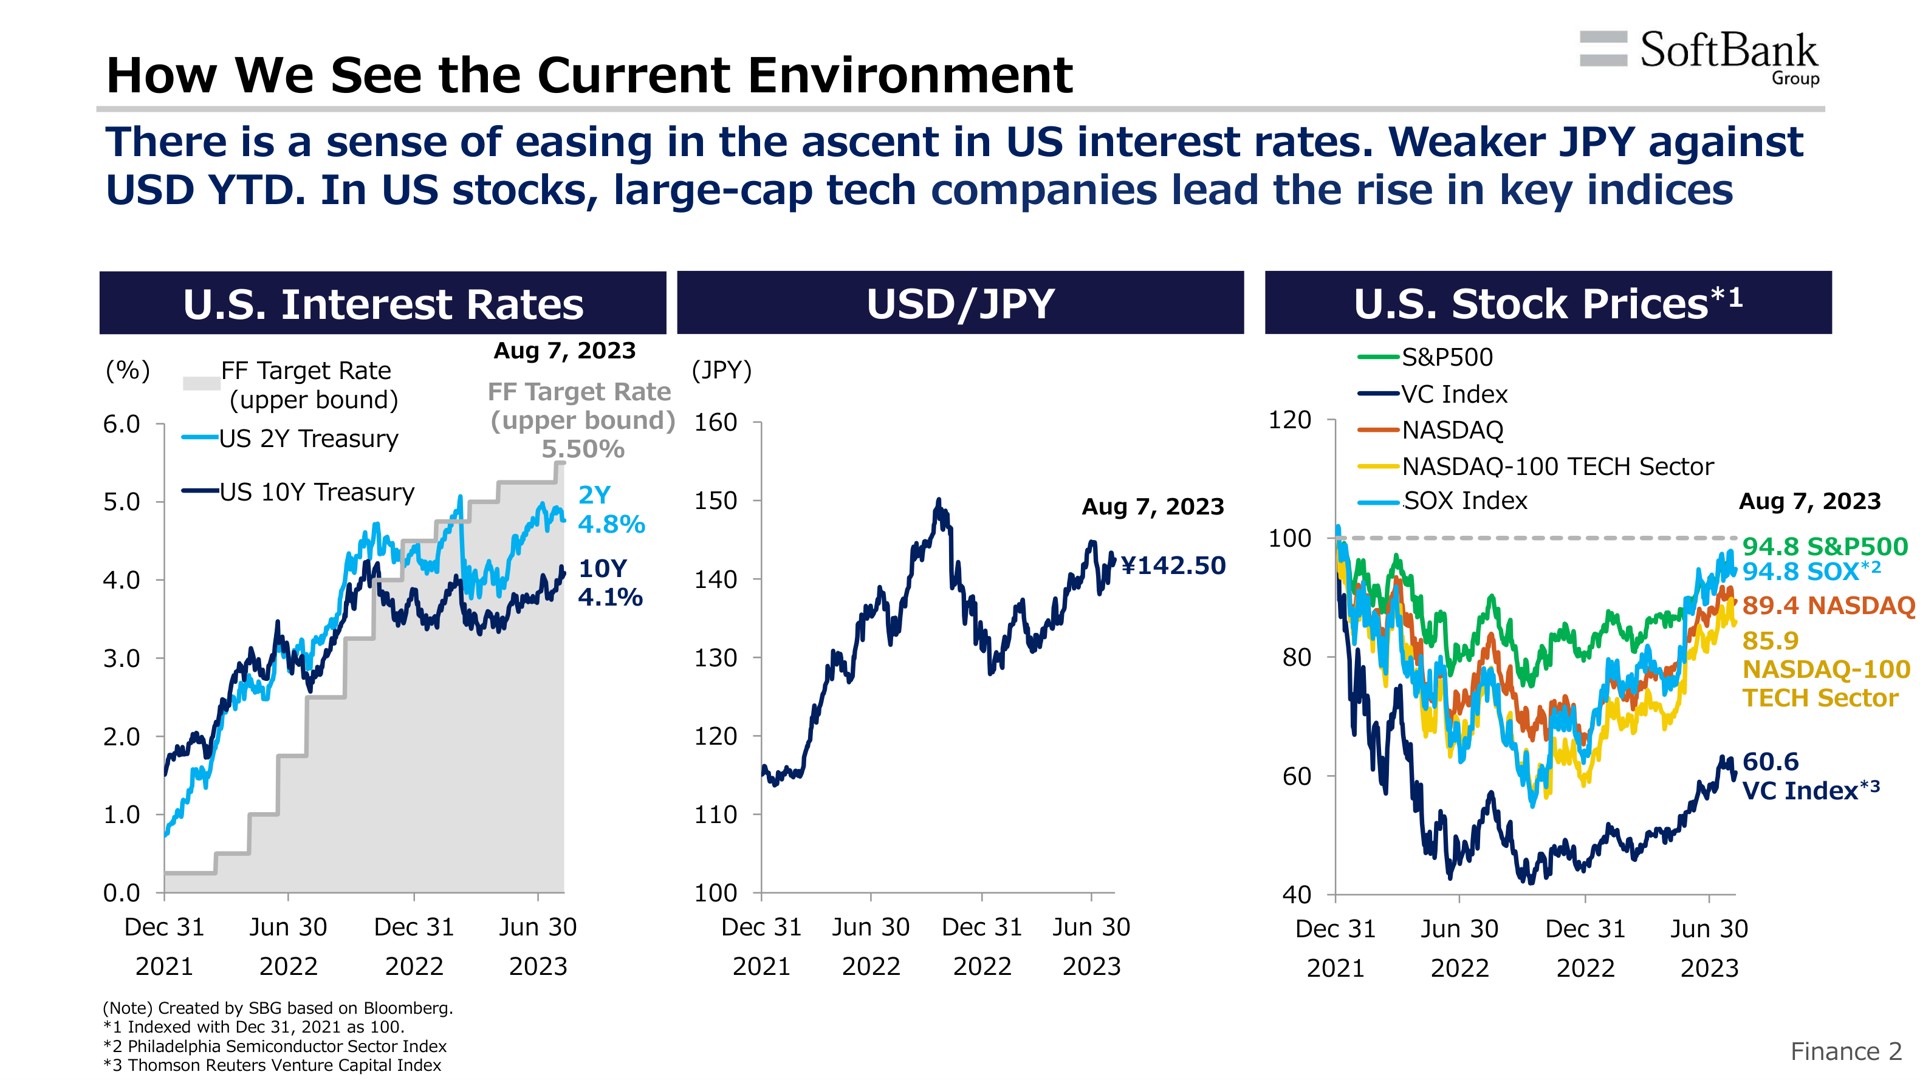 how we see the current environment there is a sense of easing in the ascent in us interest rates against in us stocks large cap tech companies lead the rise in key indices interest rates stock prices | SoftBank